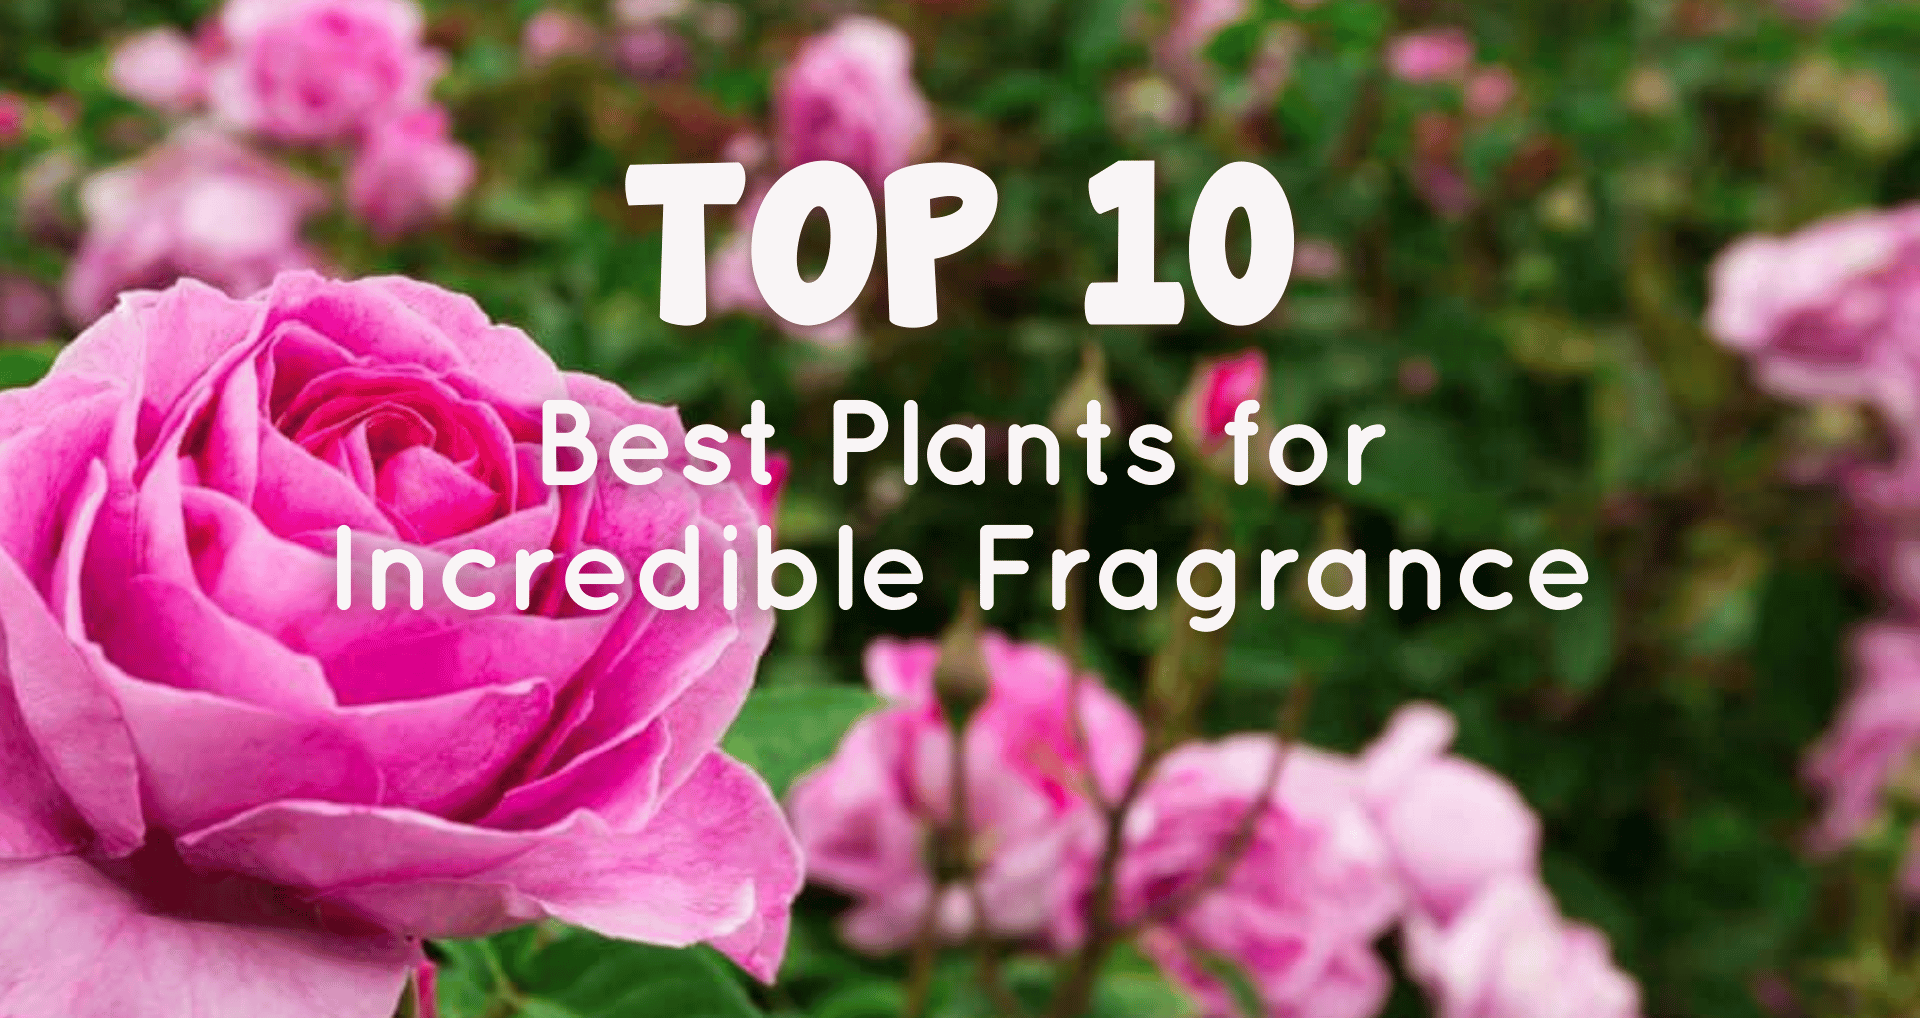 Top 10 Best Plants for Incredible Fragrance